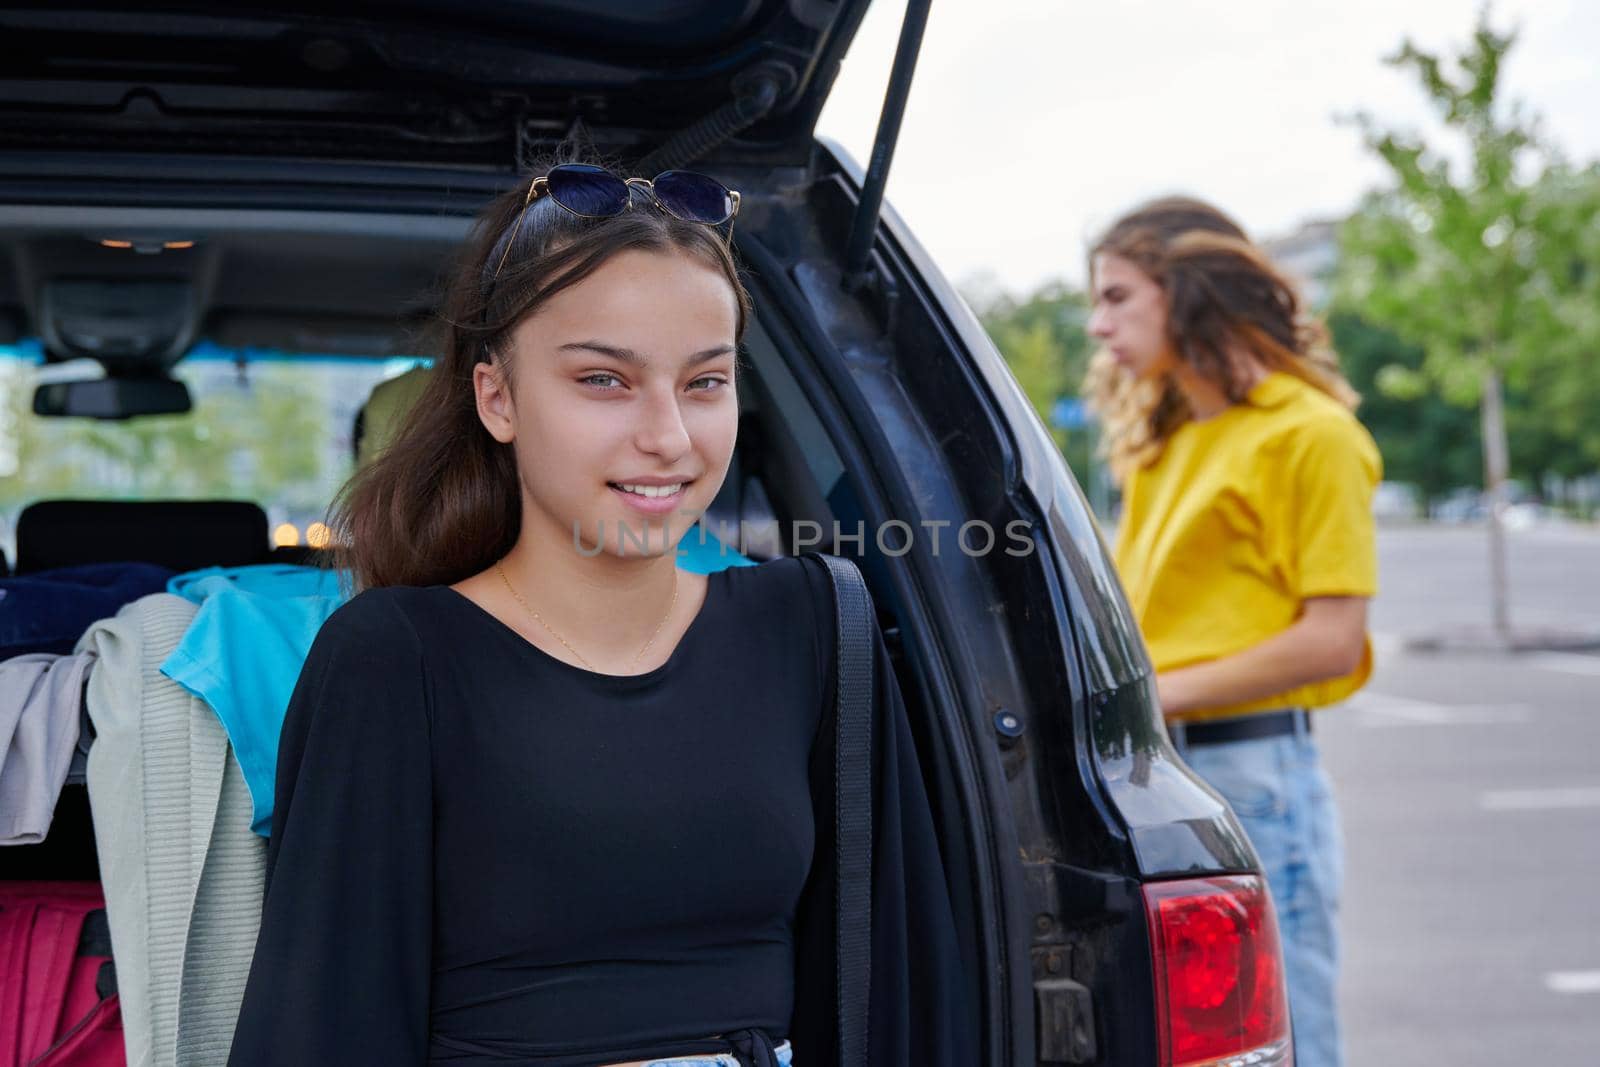 Portrait of a beautiful teenage girl of fourteen years. Adolescent female near the car, city guy friend background.